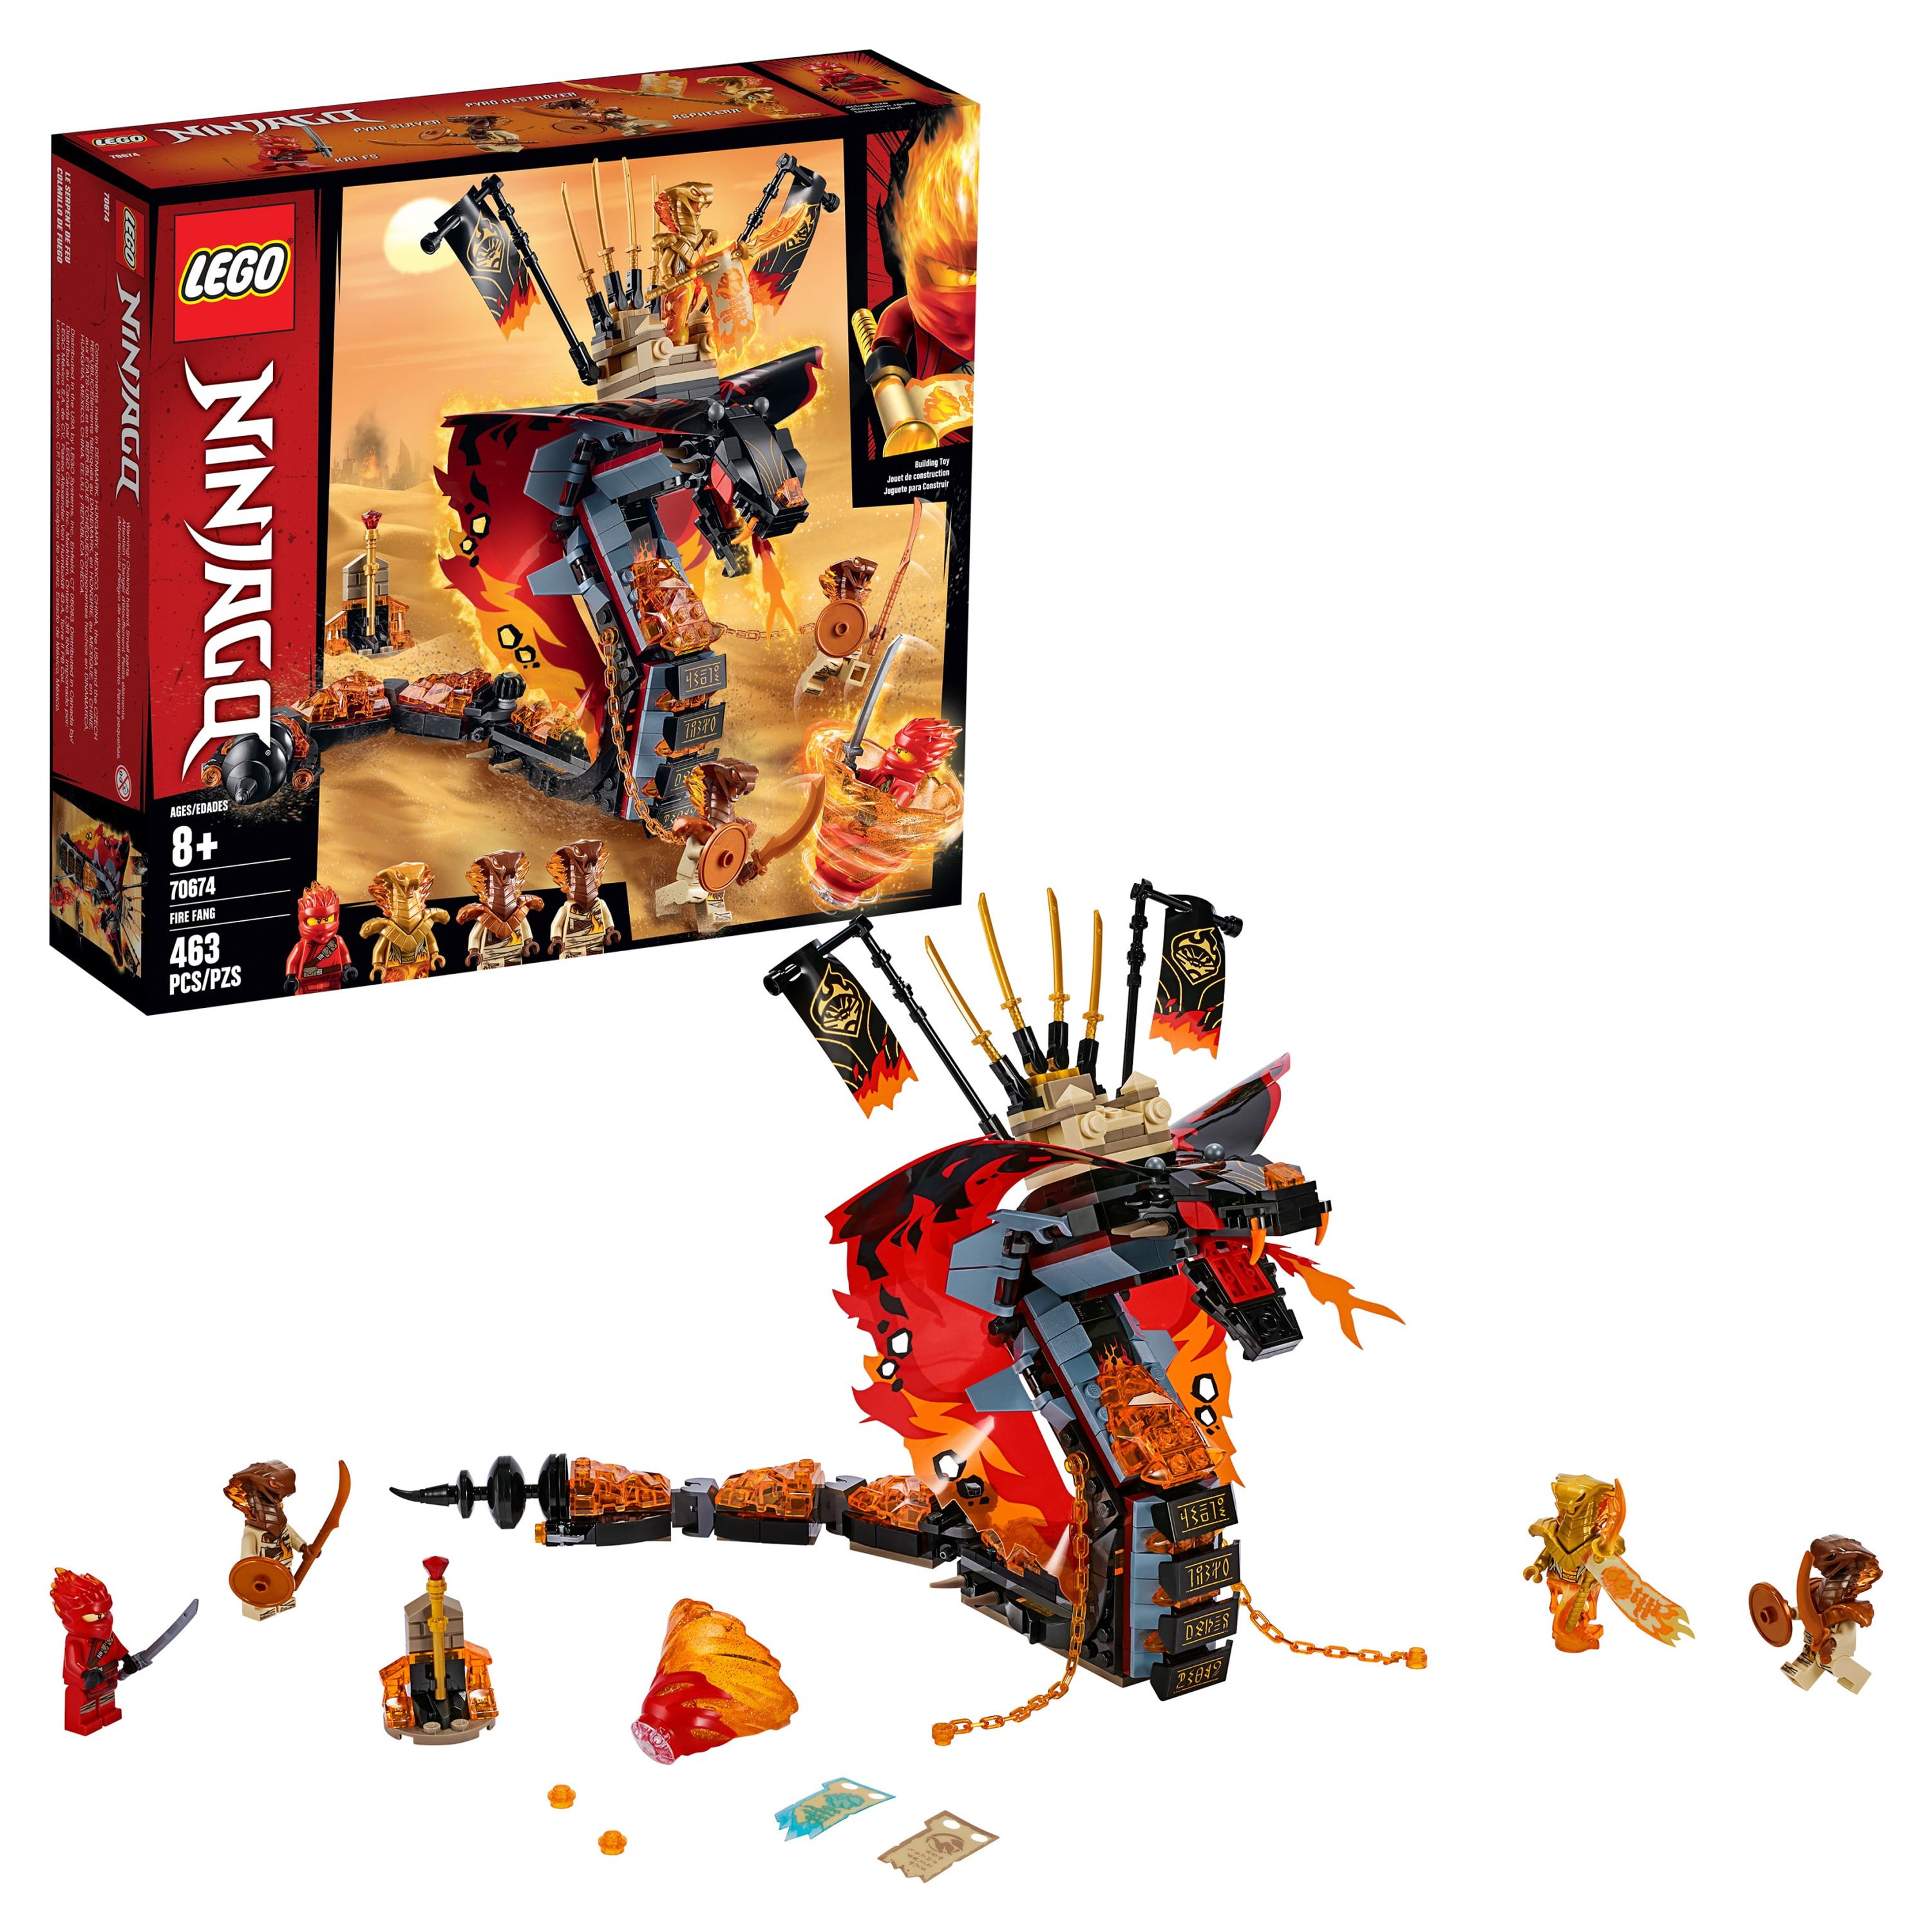 LEGO NINJAGO Fire Fang 70674 Snake Action Building Toy for Kids with Ninja Minifigures (463 pieces) - image 1 of 6